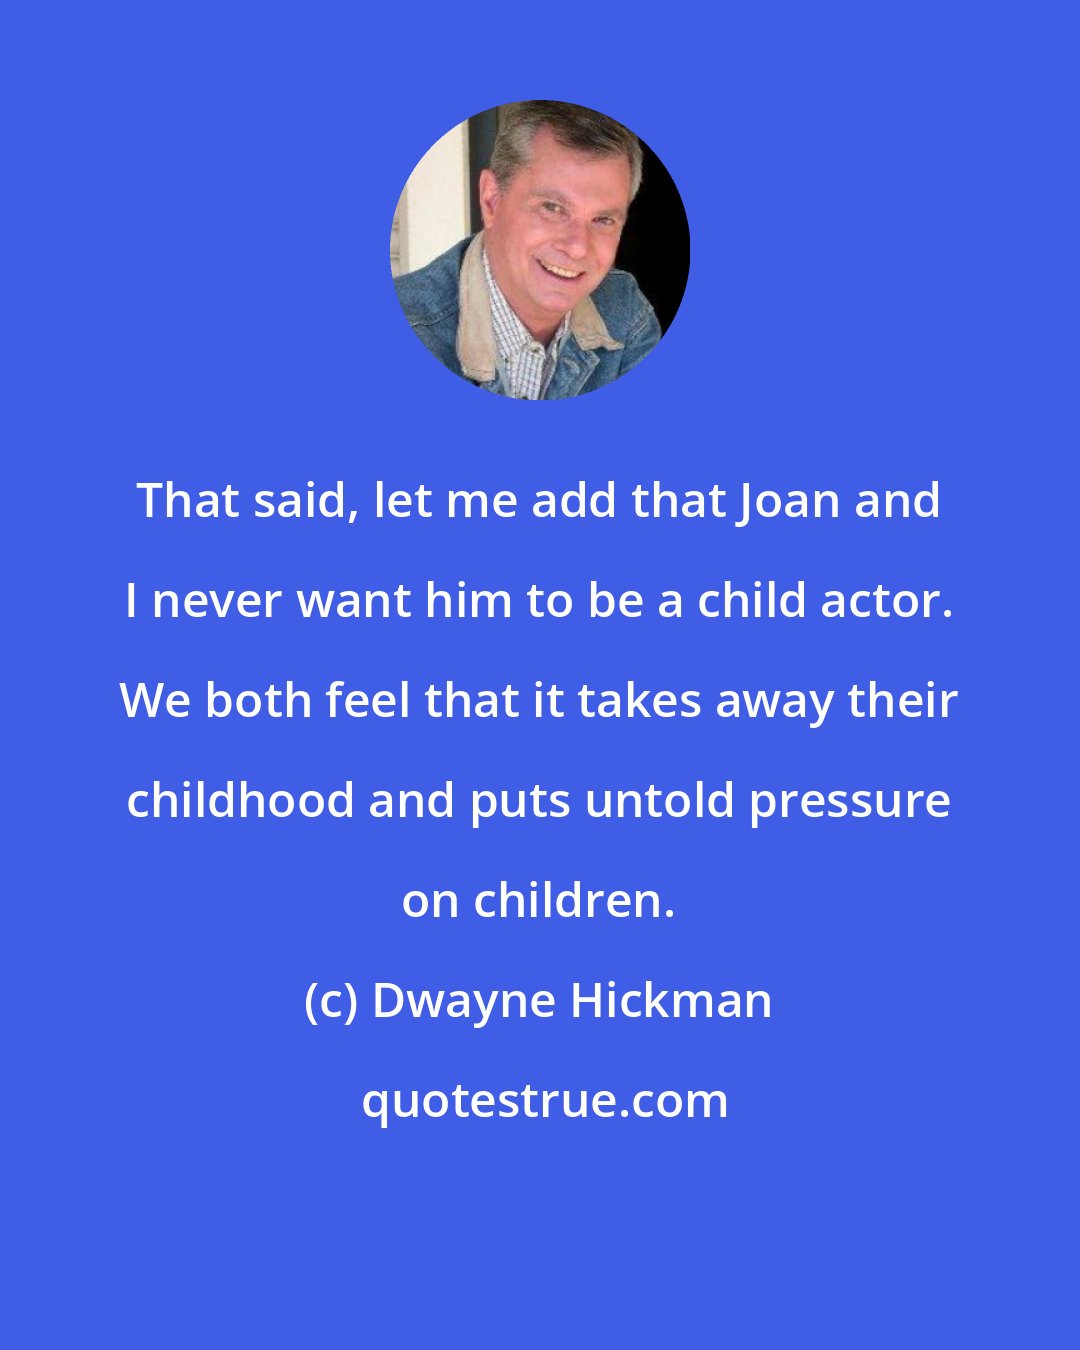 Dwayne Hickman: That said, let me add that Joan and I never want him to be a child actor. We both feel that it takes away their childhood and puts untold pressure on children.